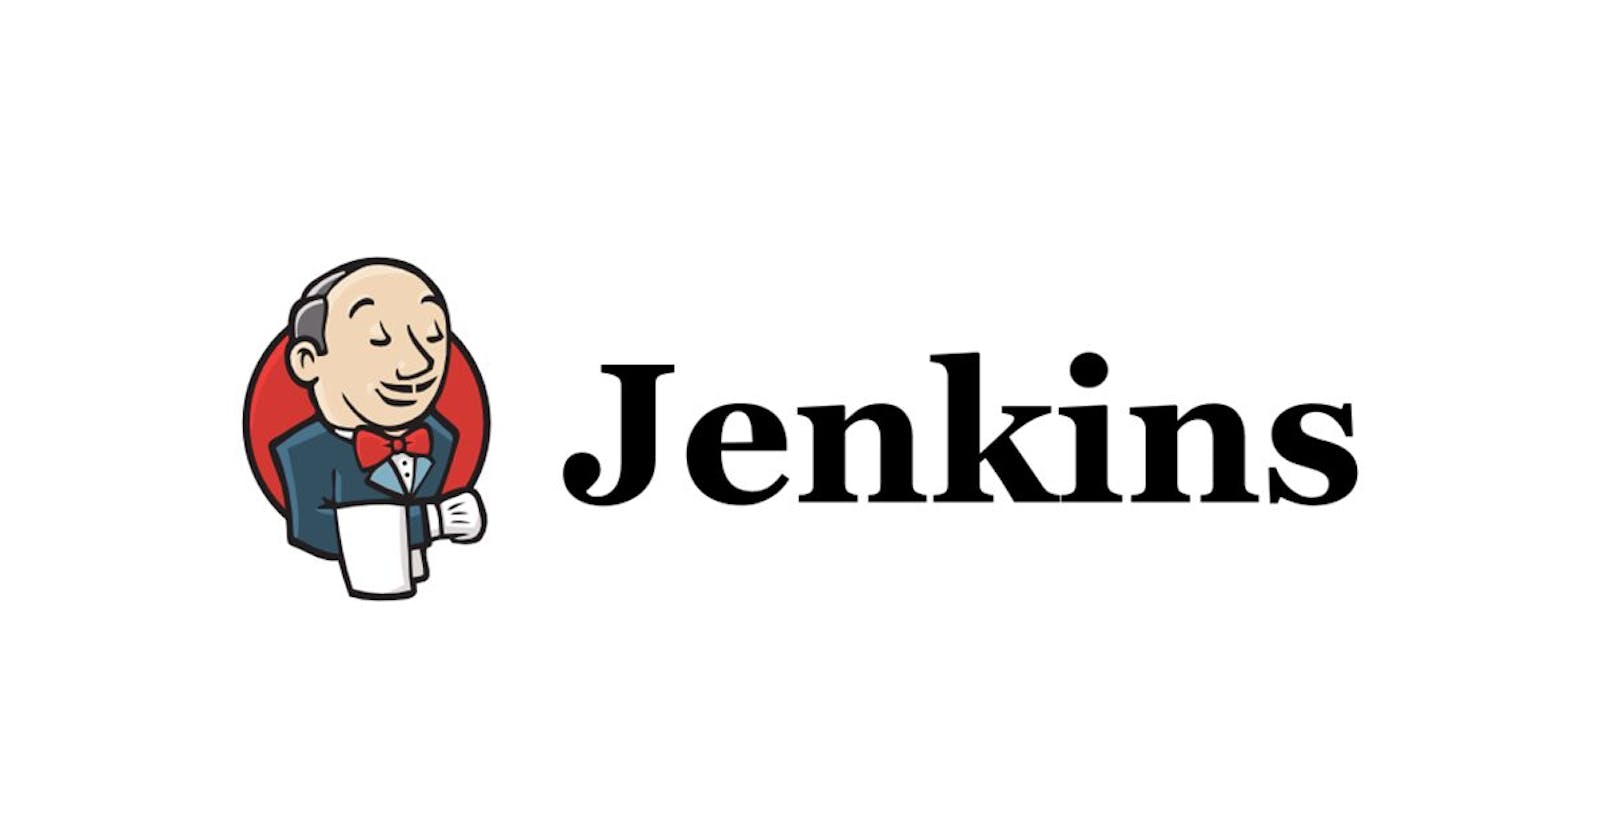 How to Setup Jenkins Docker Container on Server